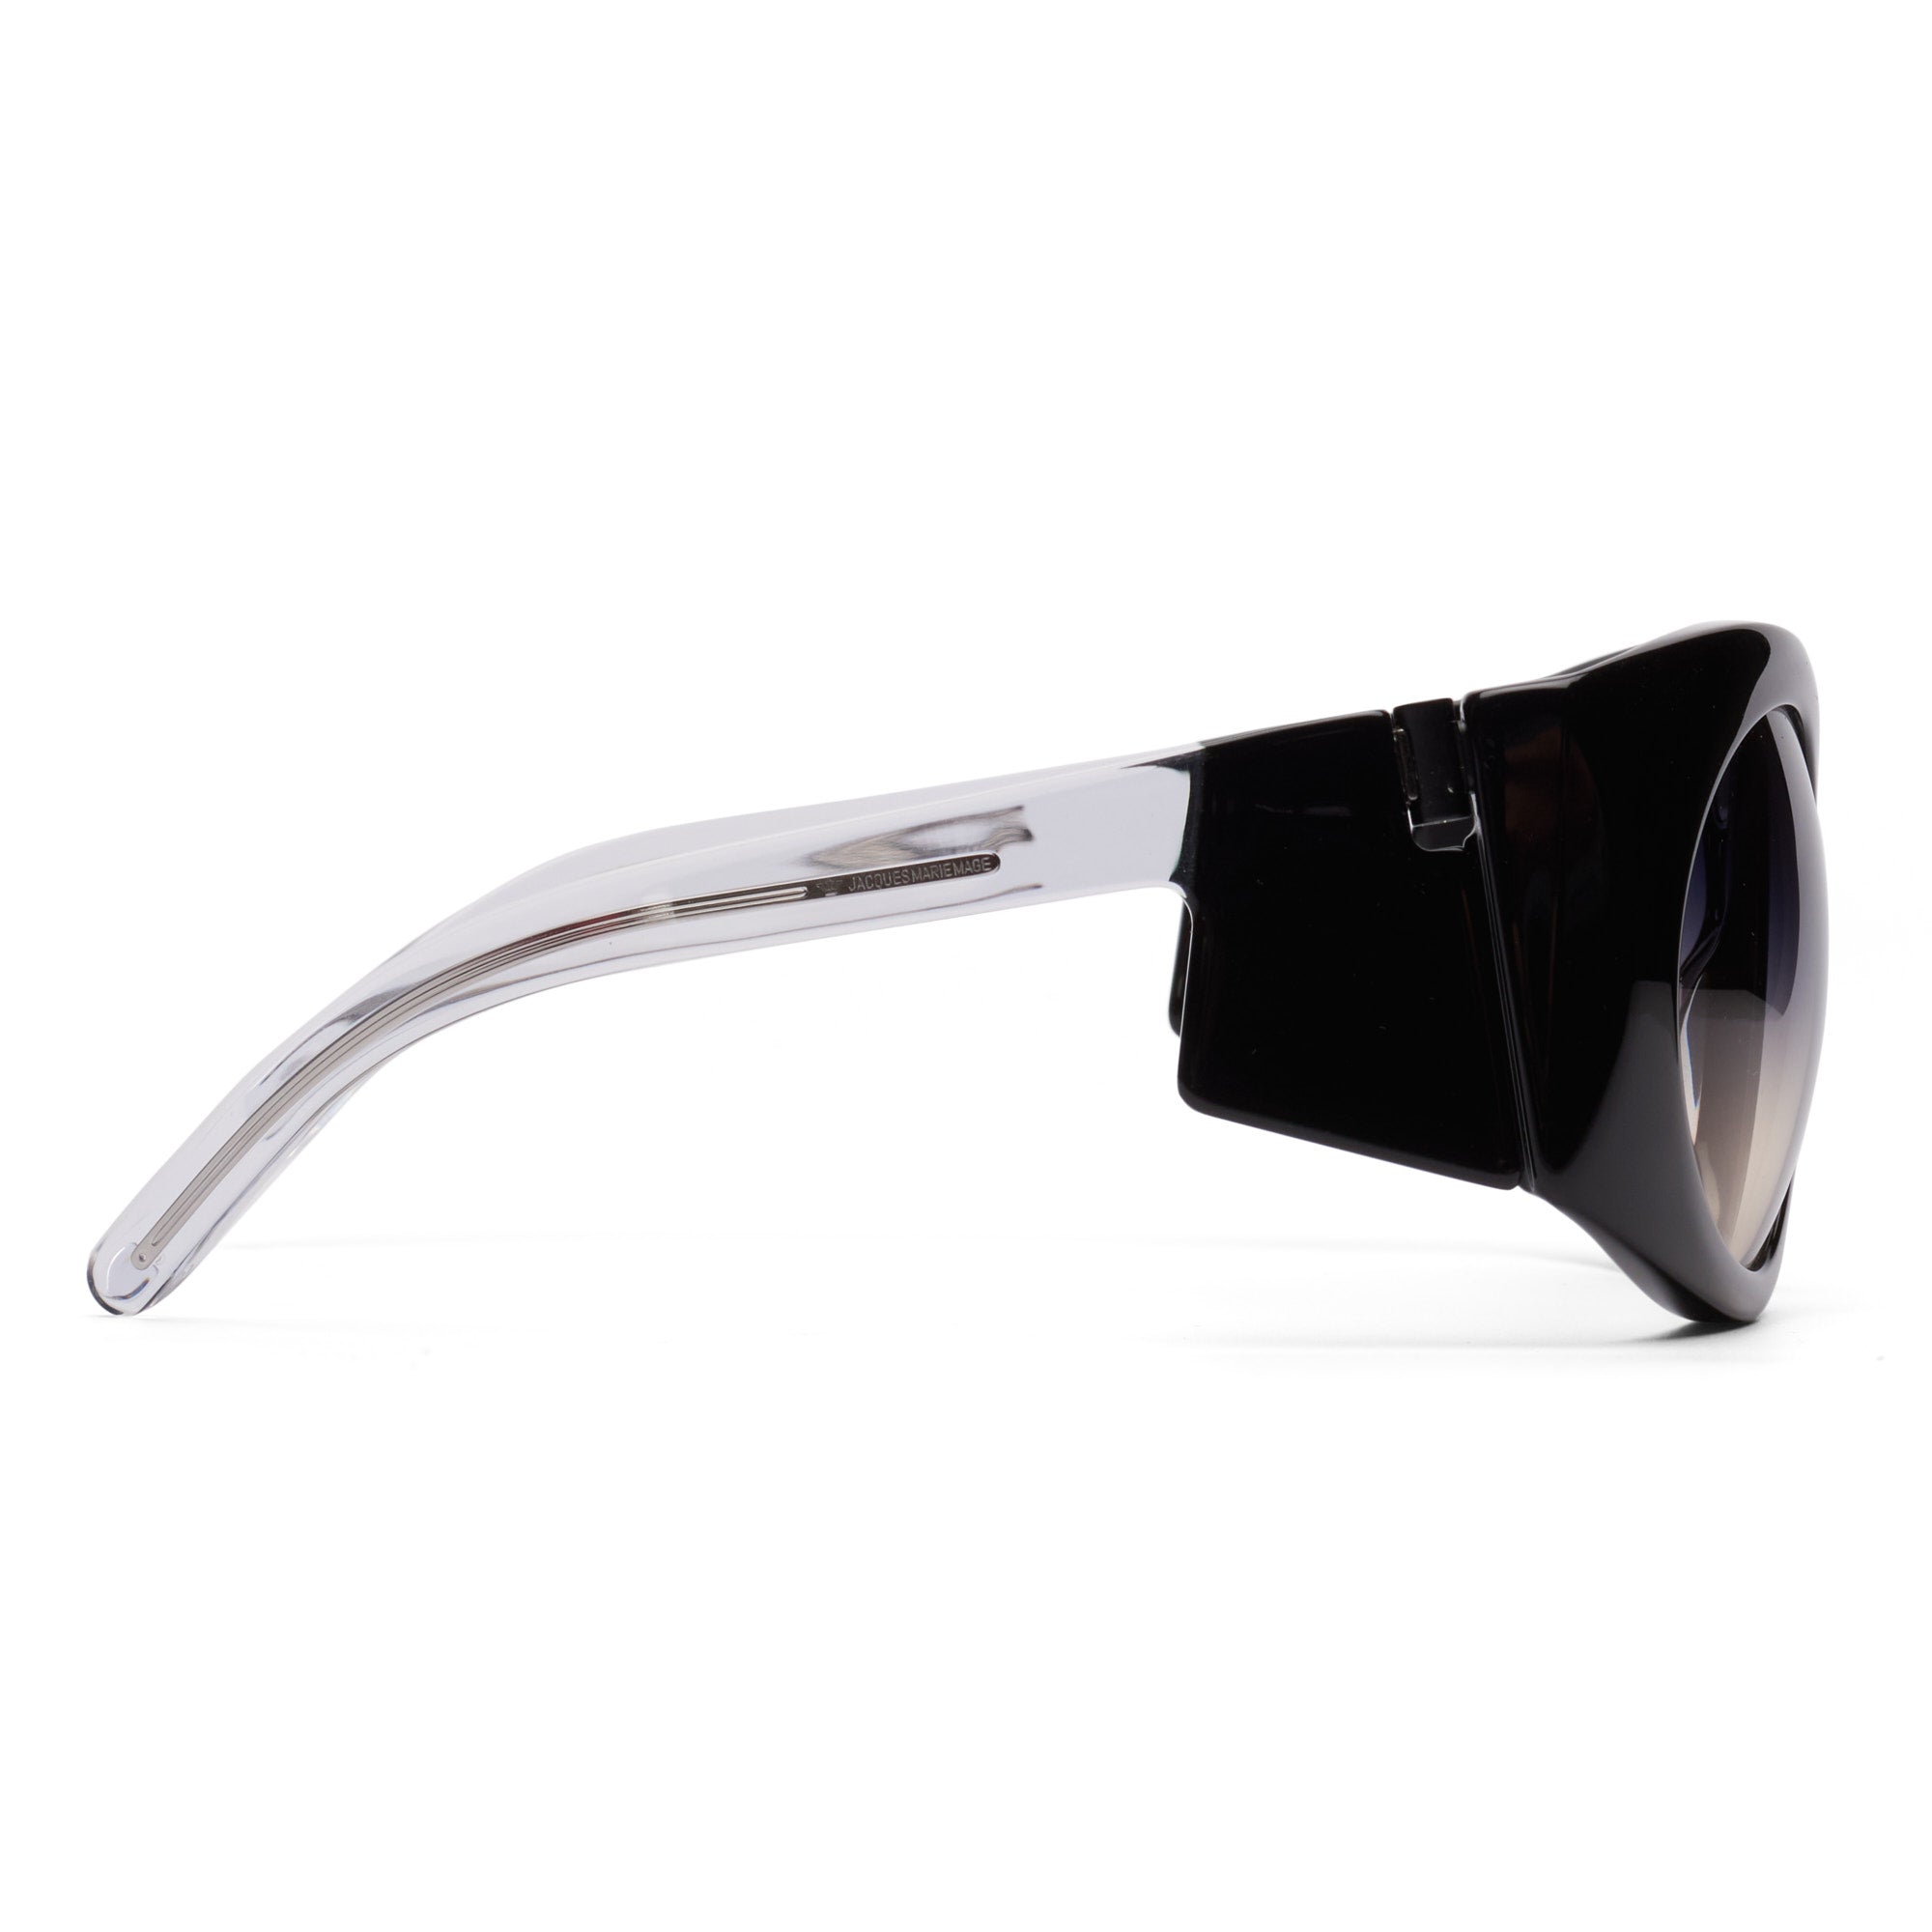 JACQUES MARIE MAGE "Duval" JMMDV-89 Limited Edition 04/150 Sunglasses NEW JACQUES MARIE MAGE